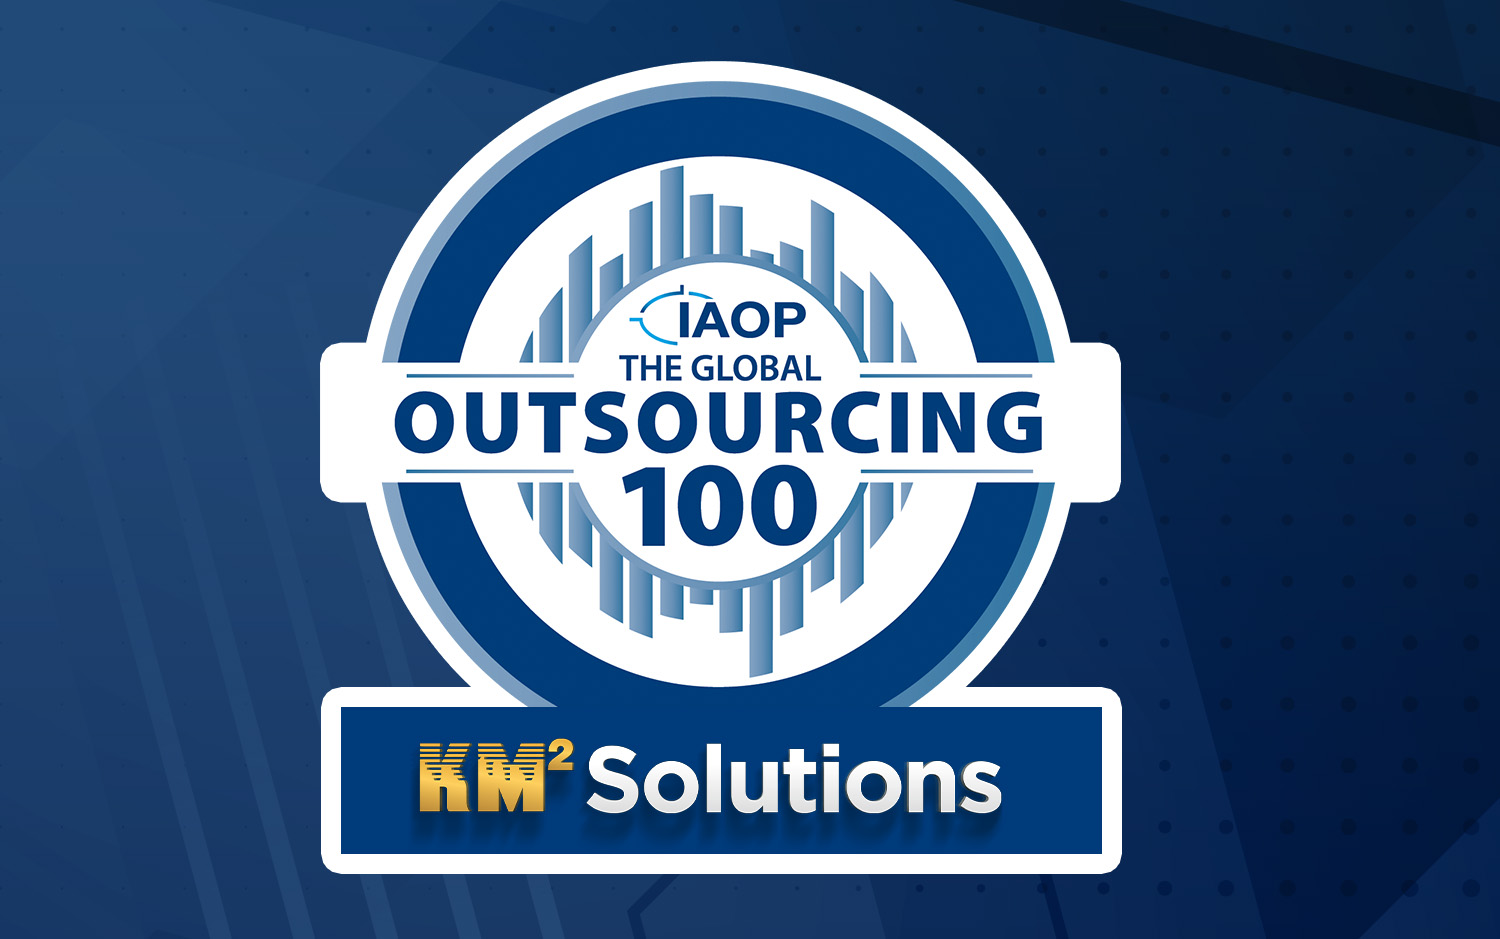 IAOP KM² Solutions Nearshore outsourcing call center services